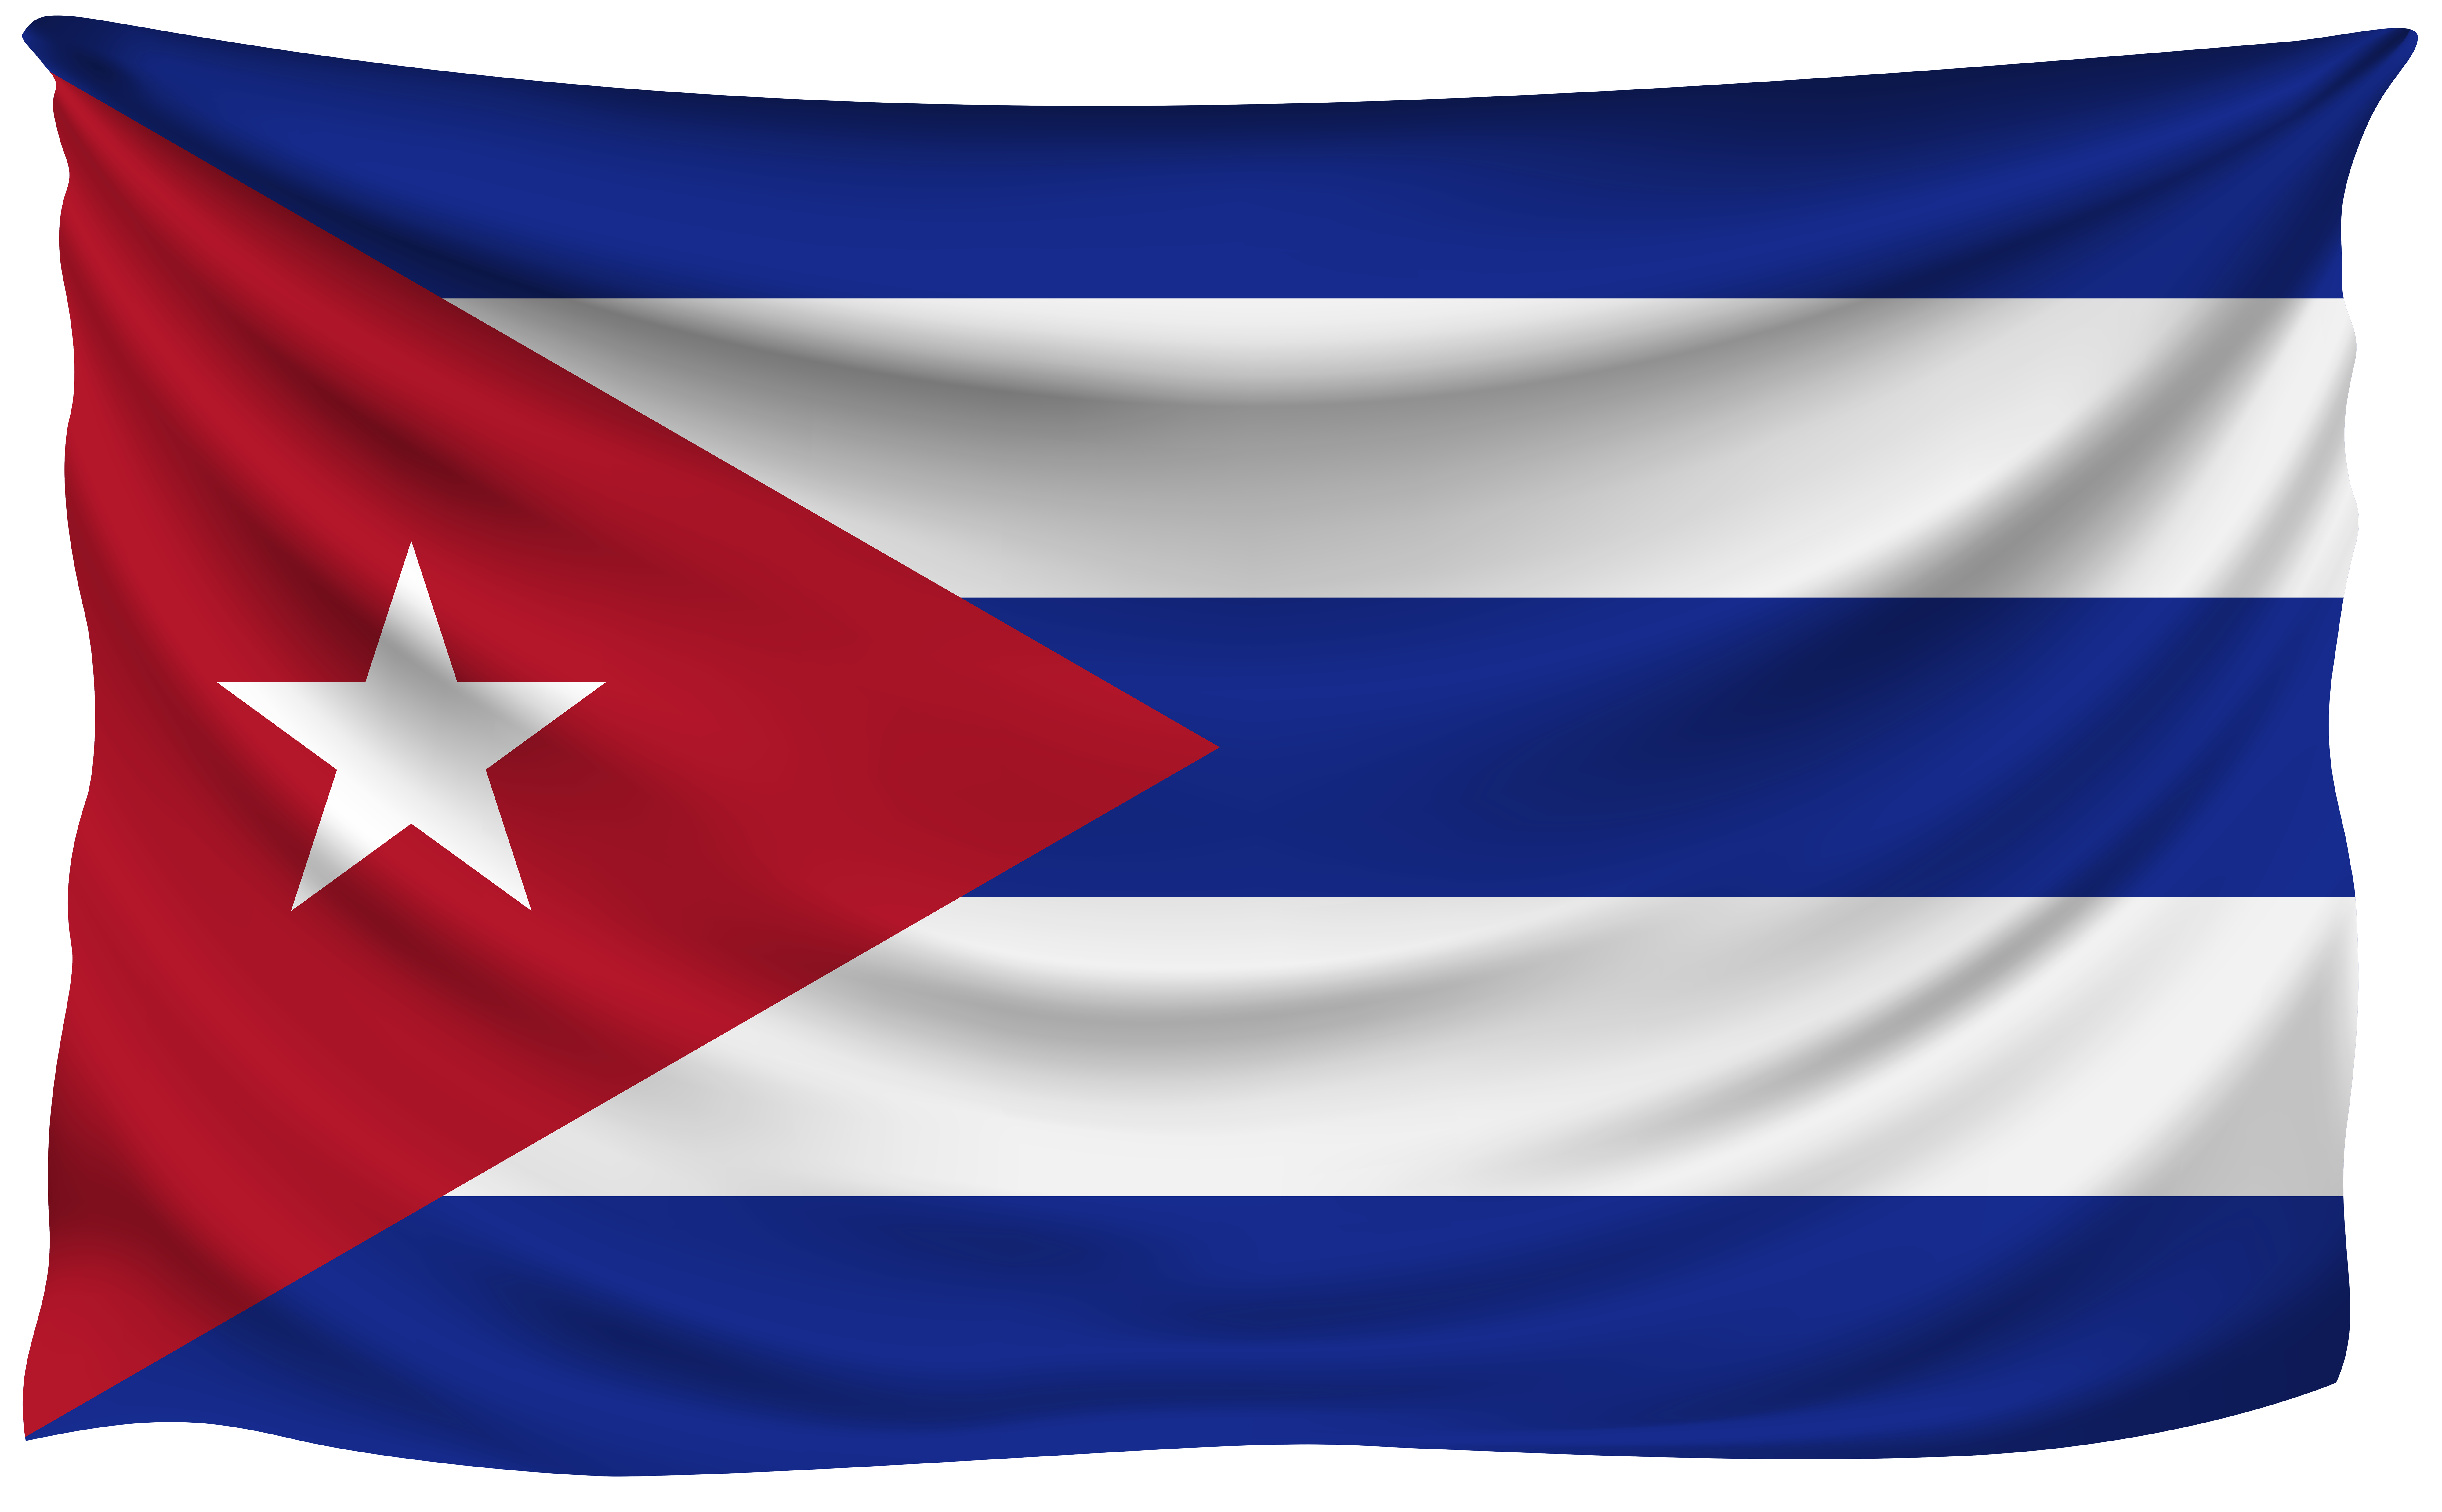 Cuba Wrinkled Flag | Gallery Yopriceville - High-Quality Images and